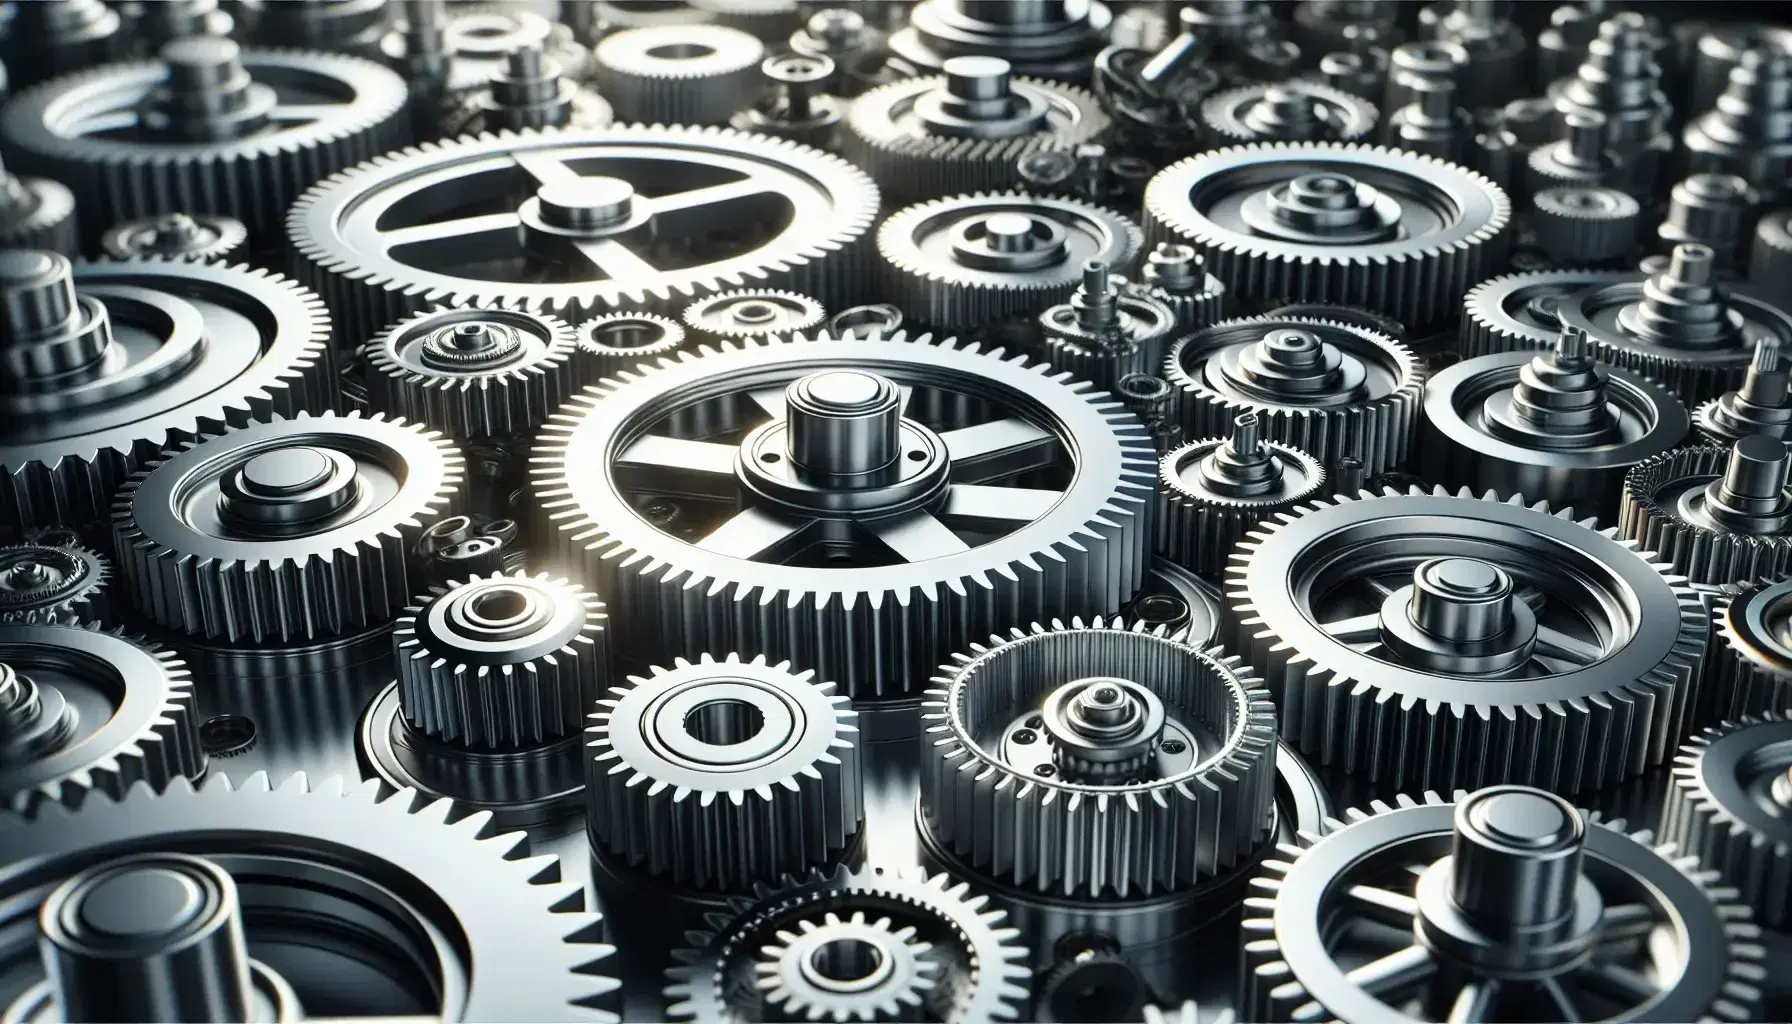 Interconnected mechanical gears of various sizes with fine details, metallic reflections and subtle shadows on gray-white gradient background.